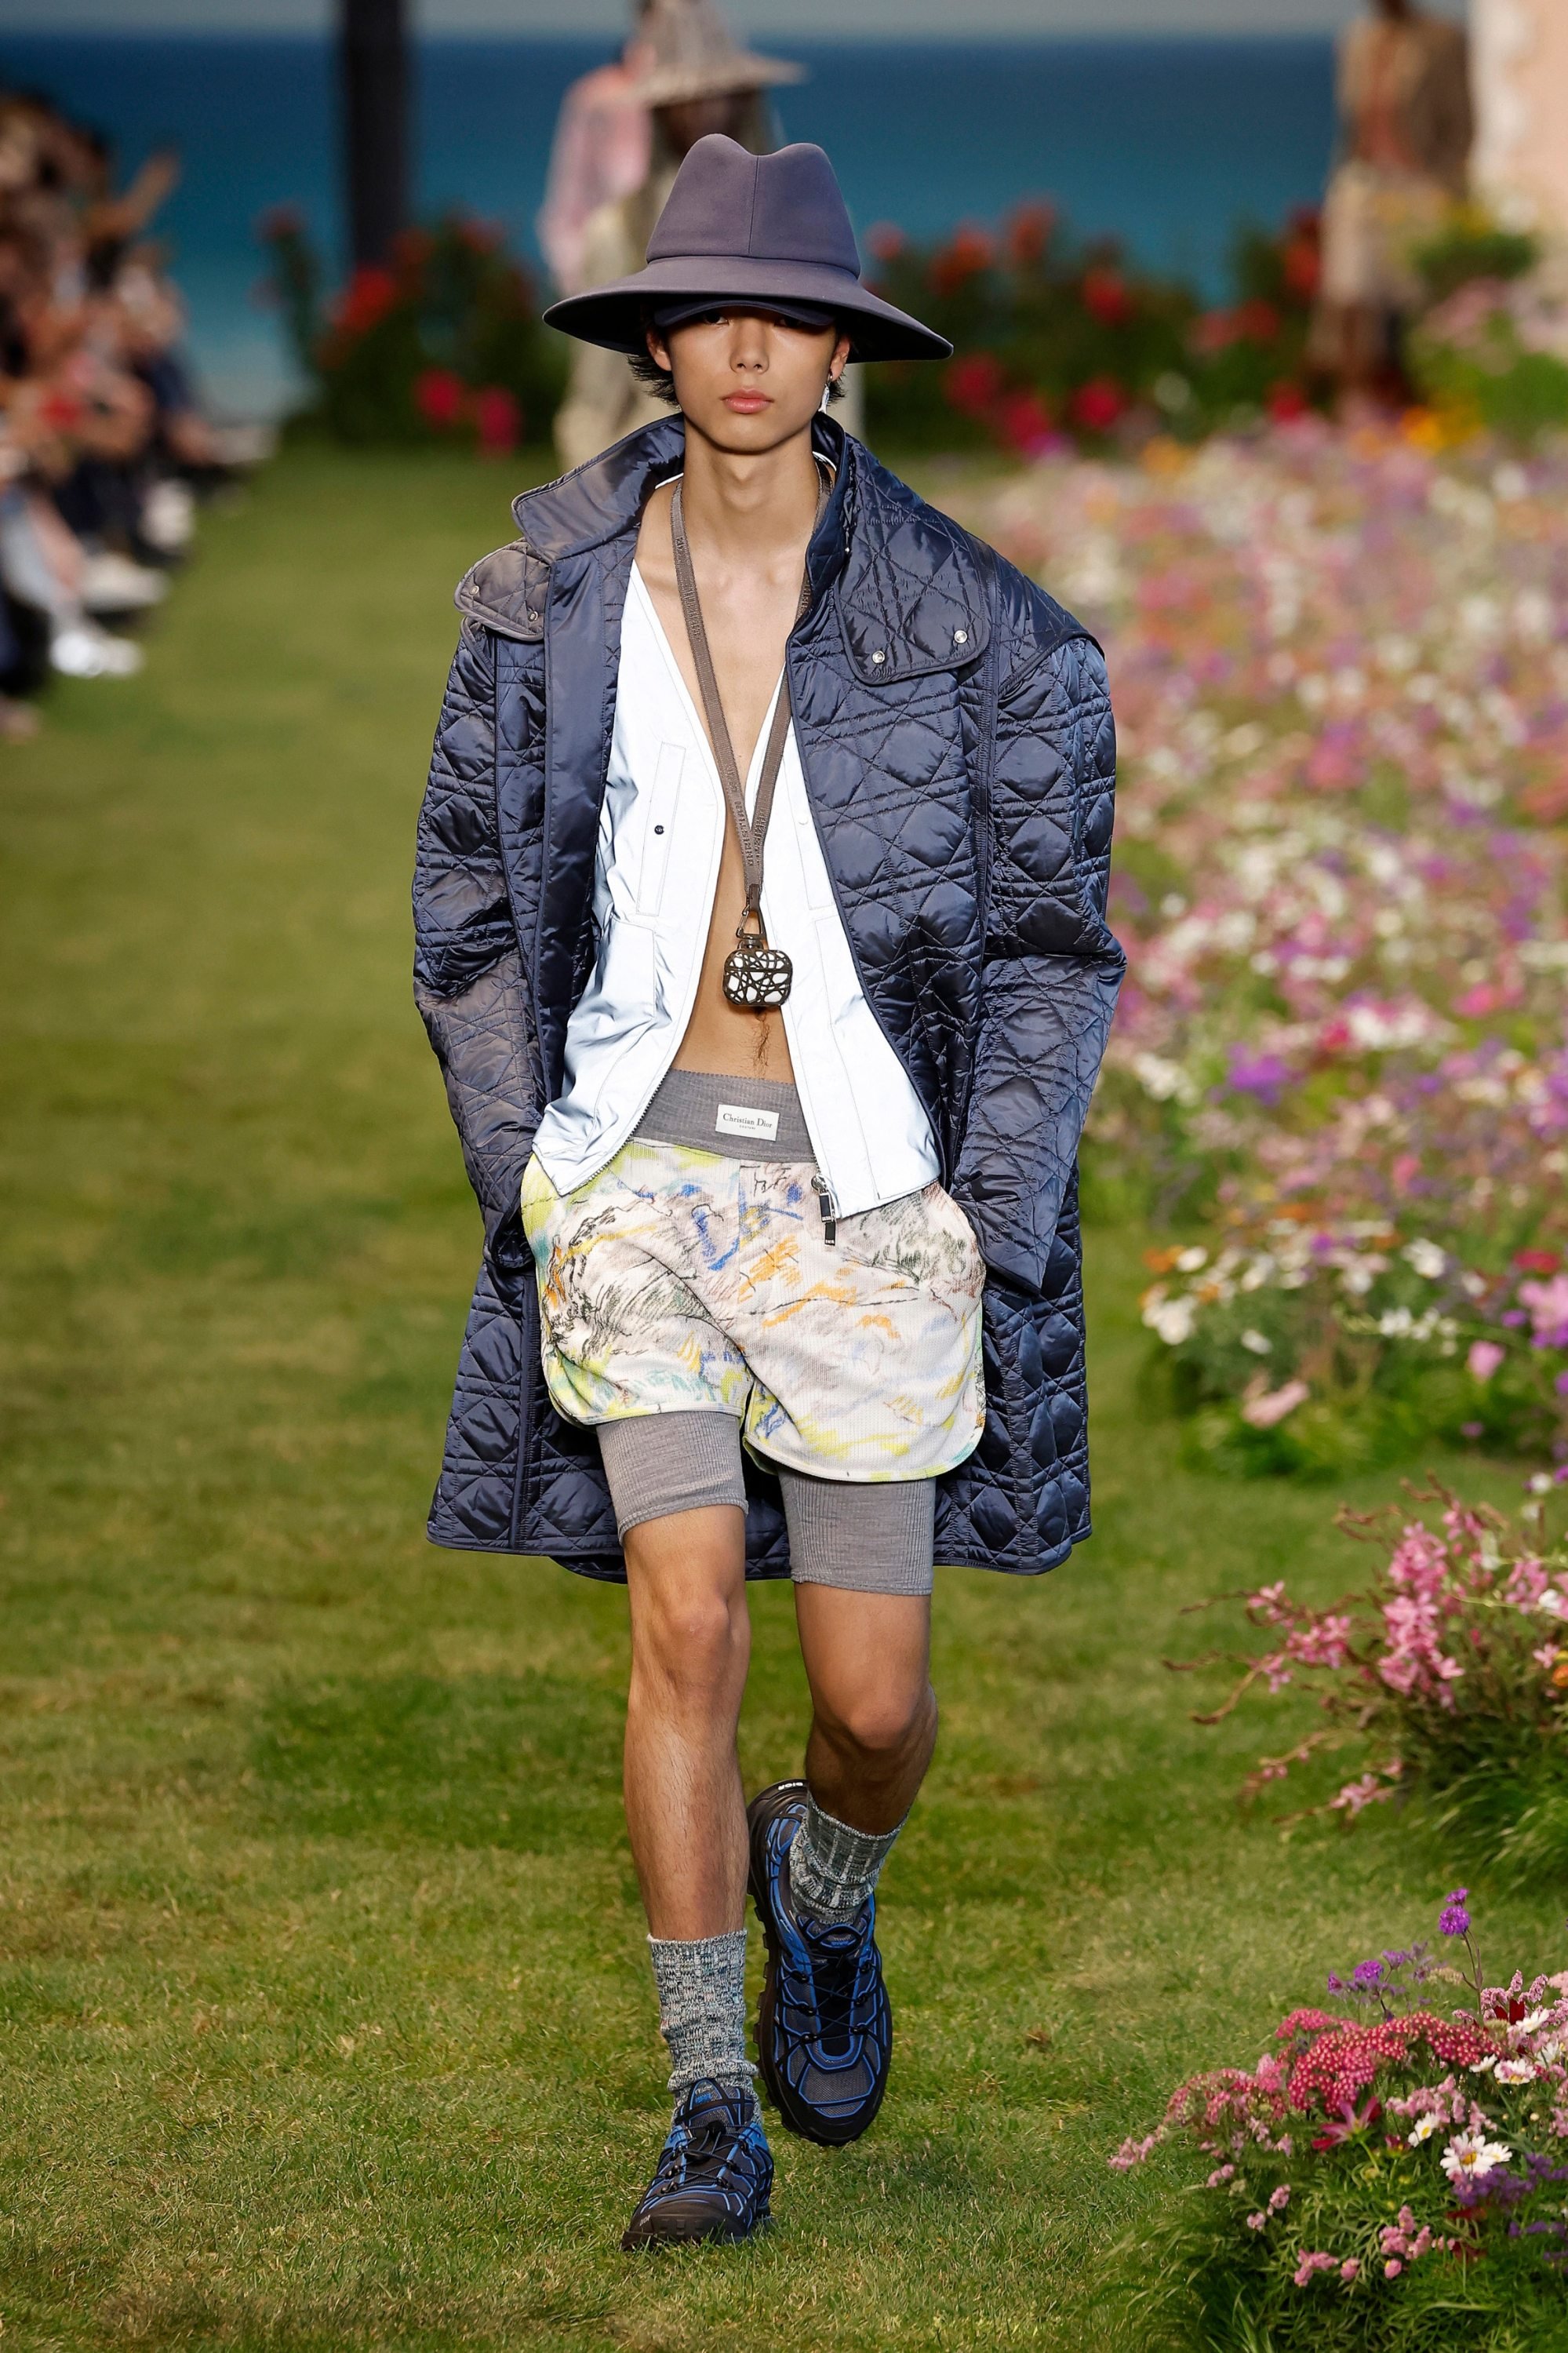 Dior men's spring/summer 2020: Kim Jones cements his place in the